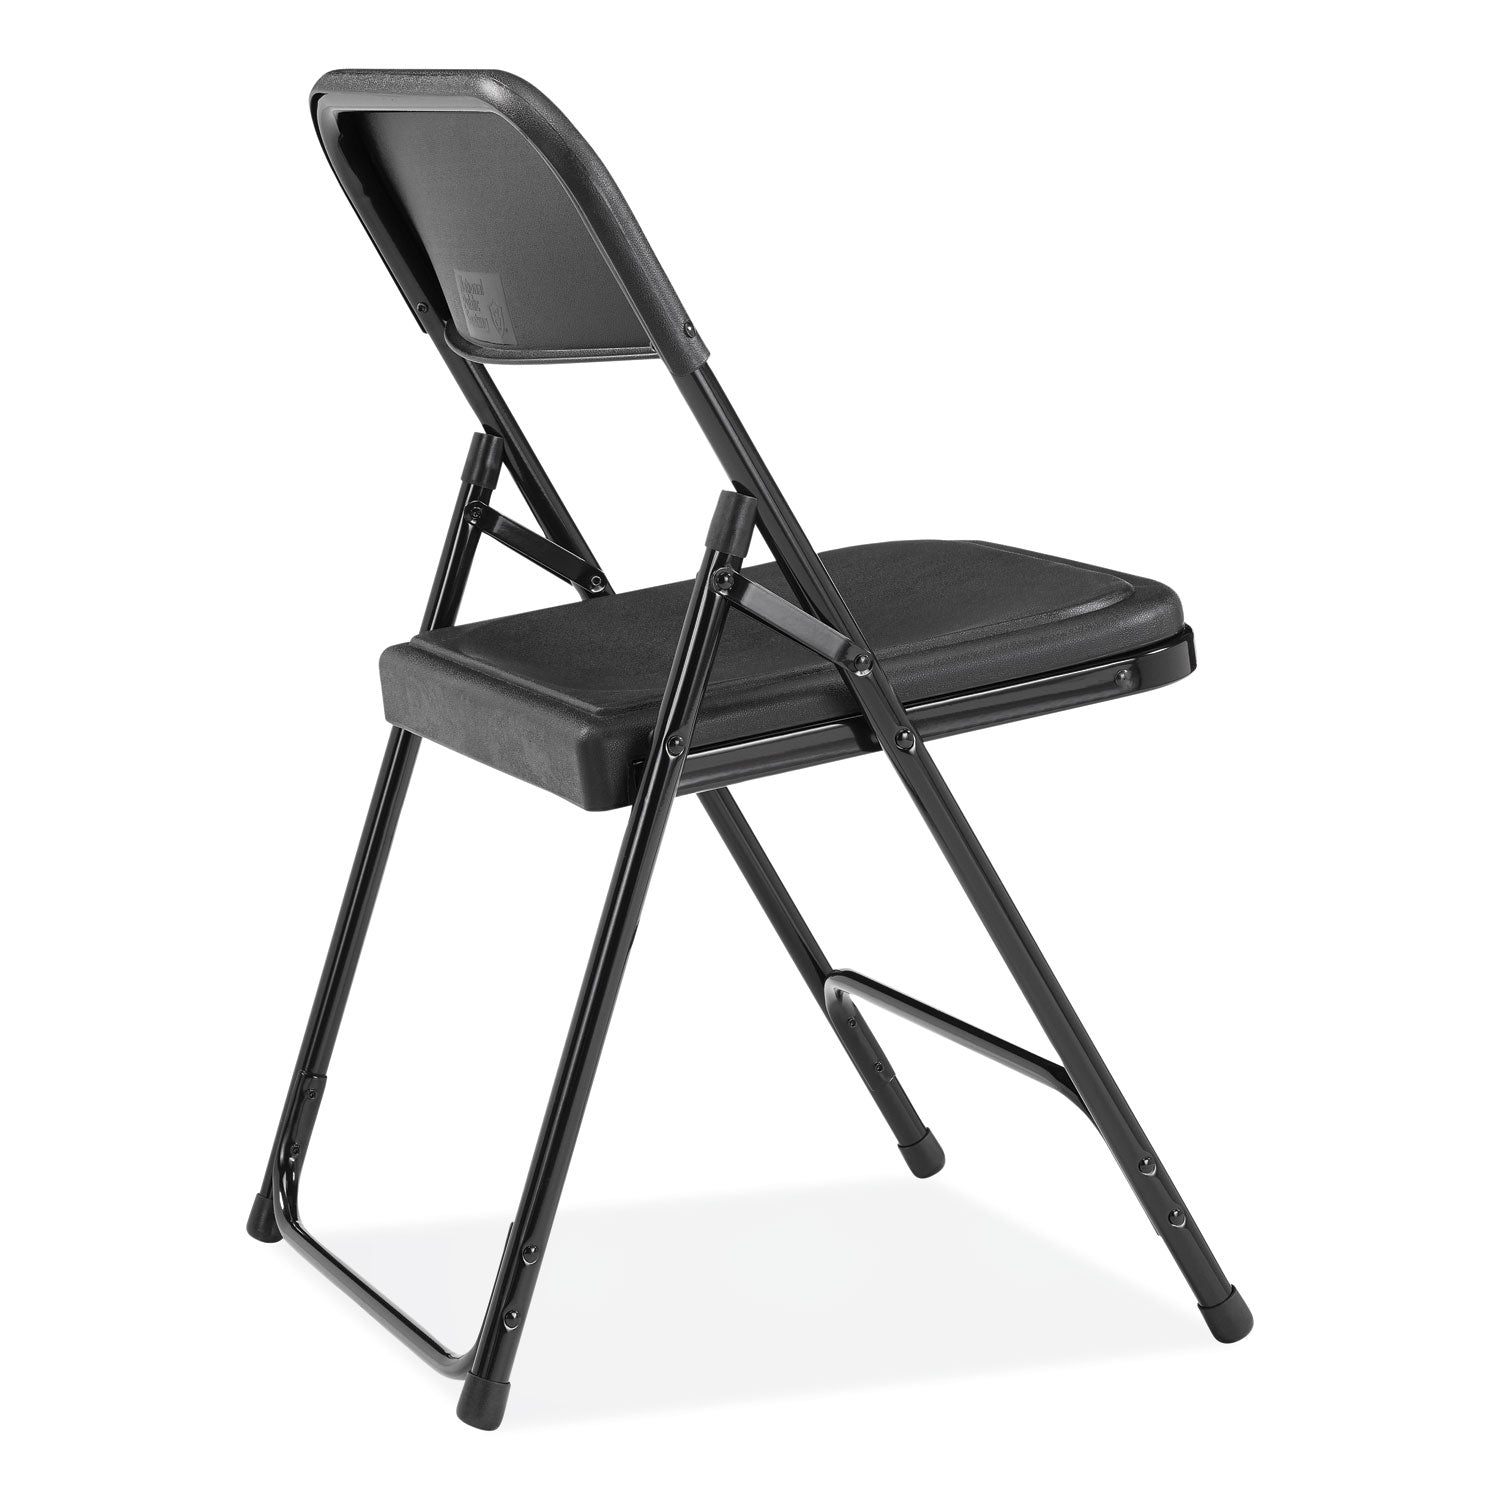 800-series-plastic-folding-chair-supports-500lb-18-seat-height-black-seat-back-black-base-4-ct-ships-in-1-3-bus-days_nps810 - 4